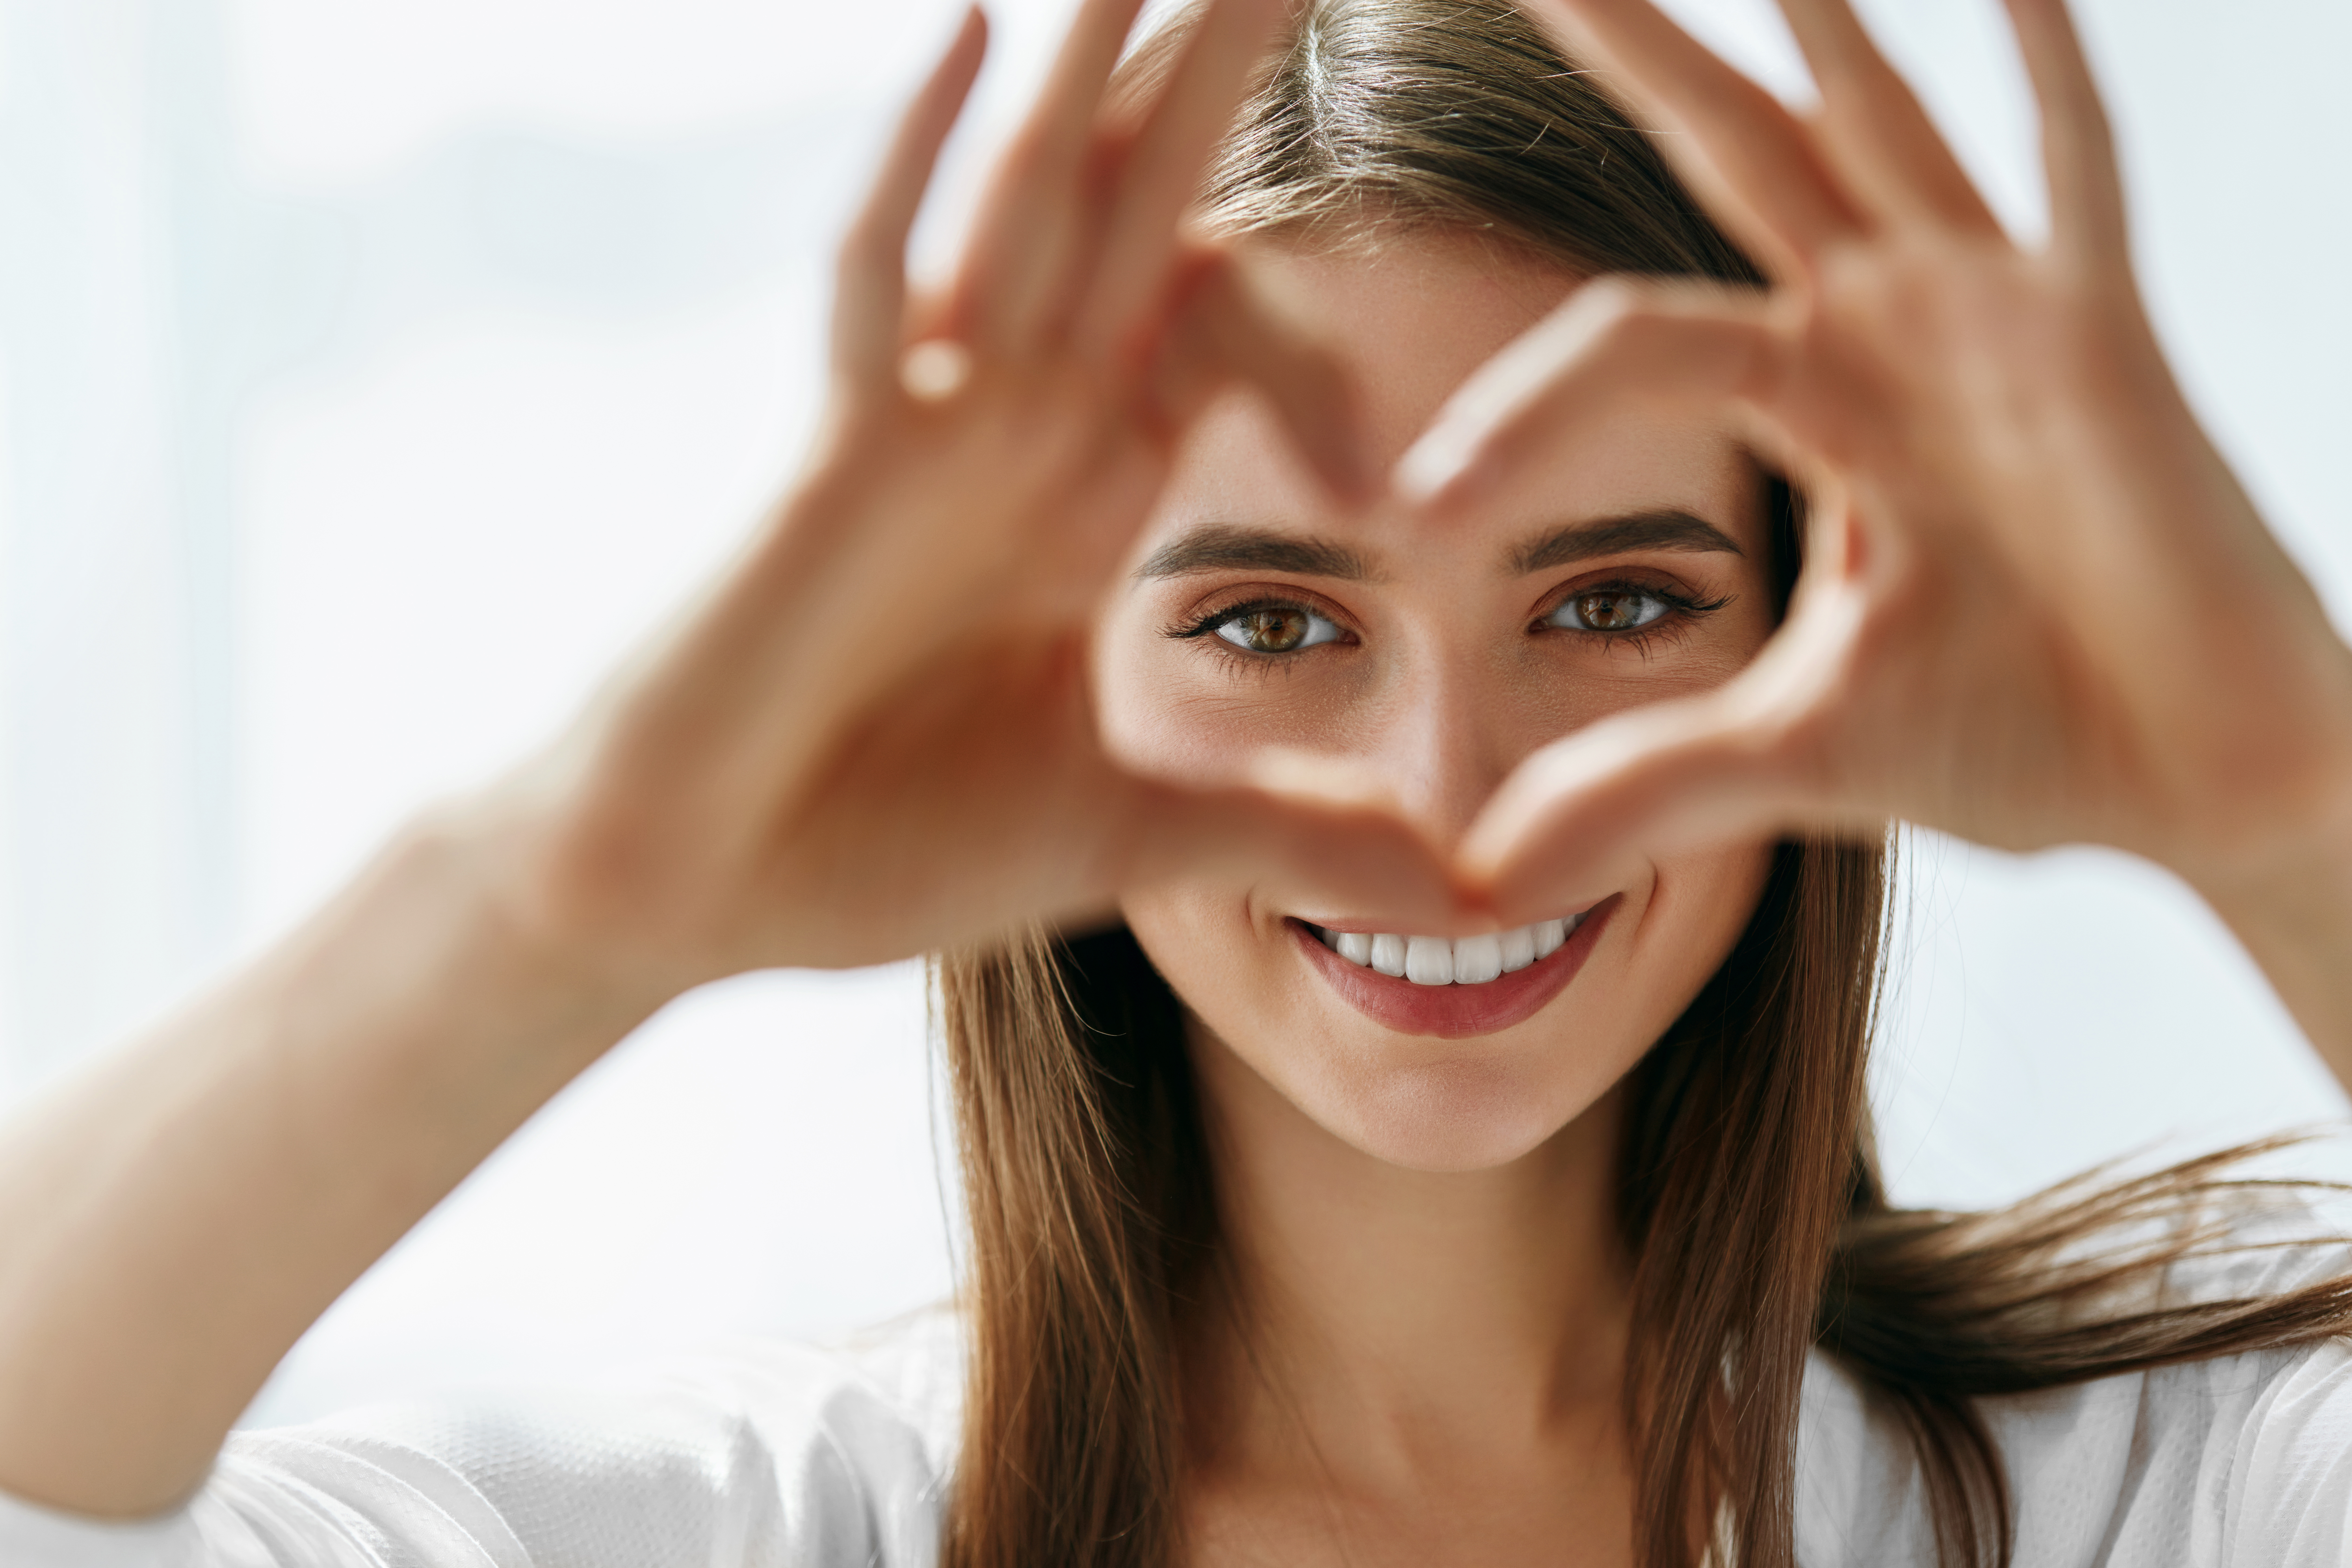 Love Your Skin: The Best Valentine’s Day Aesthetic Treatments